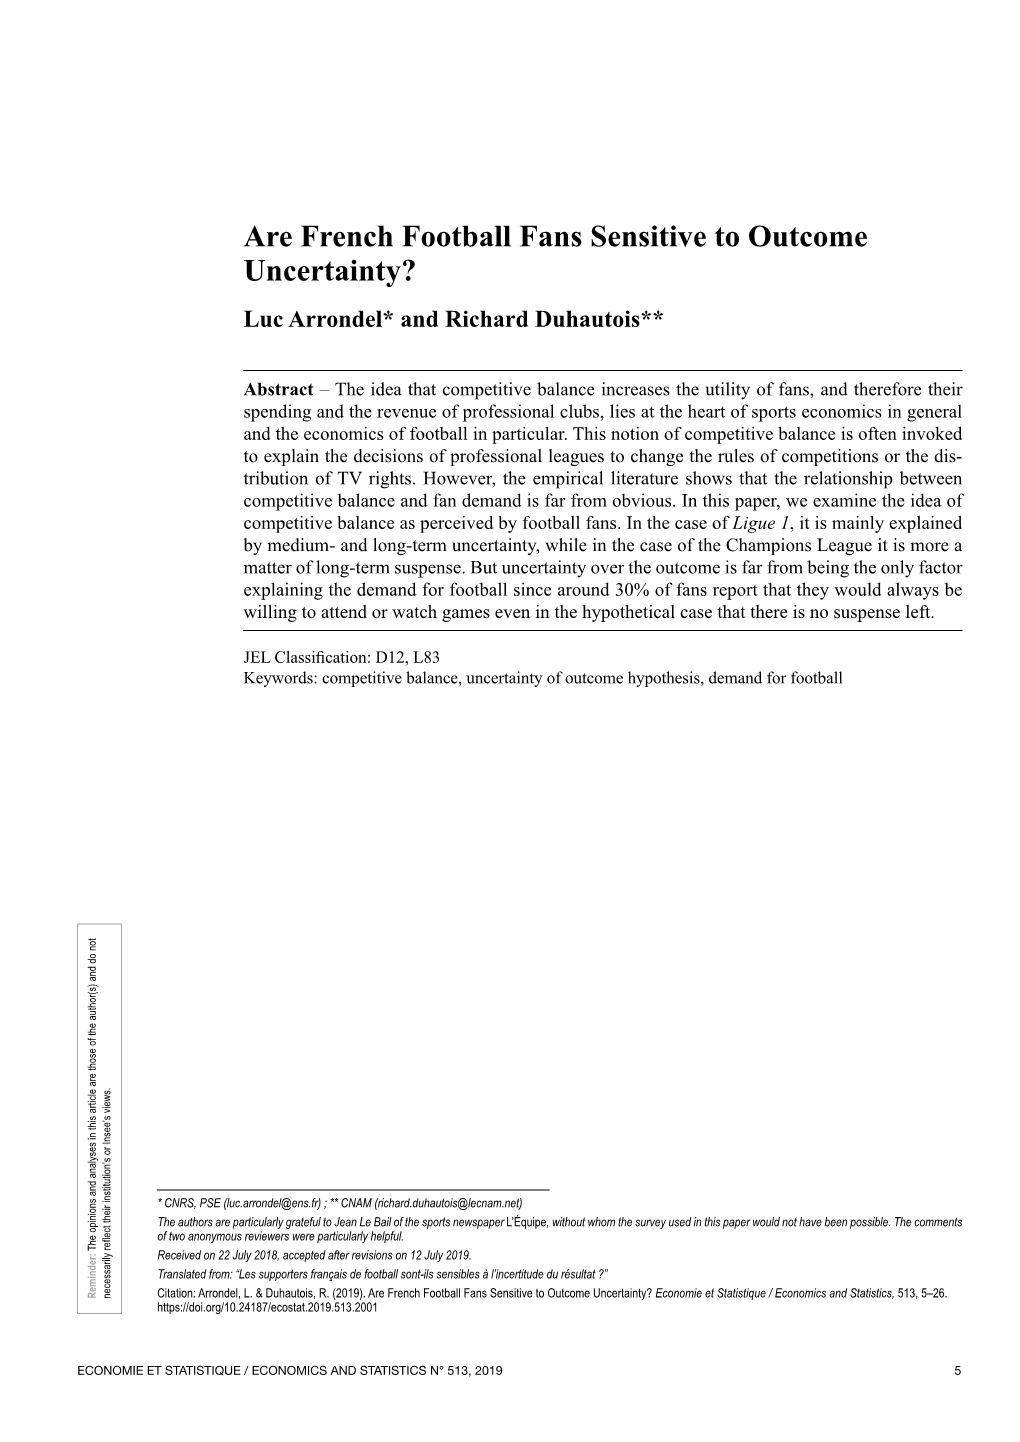 Are French Football Fans Sensitive to Outcome Uncertainty? Luc Arrondel* and Richard Duhautois**